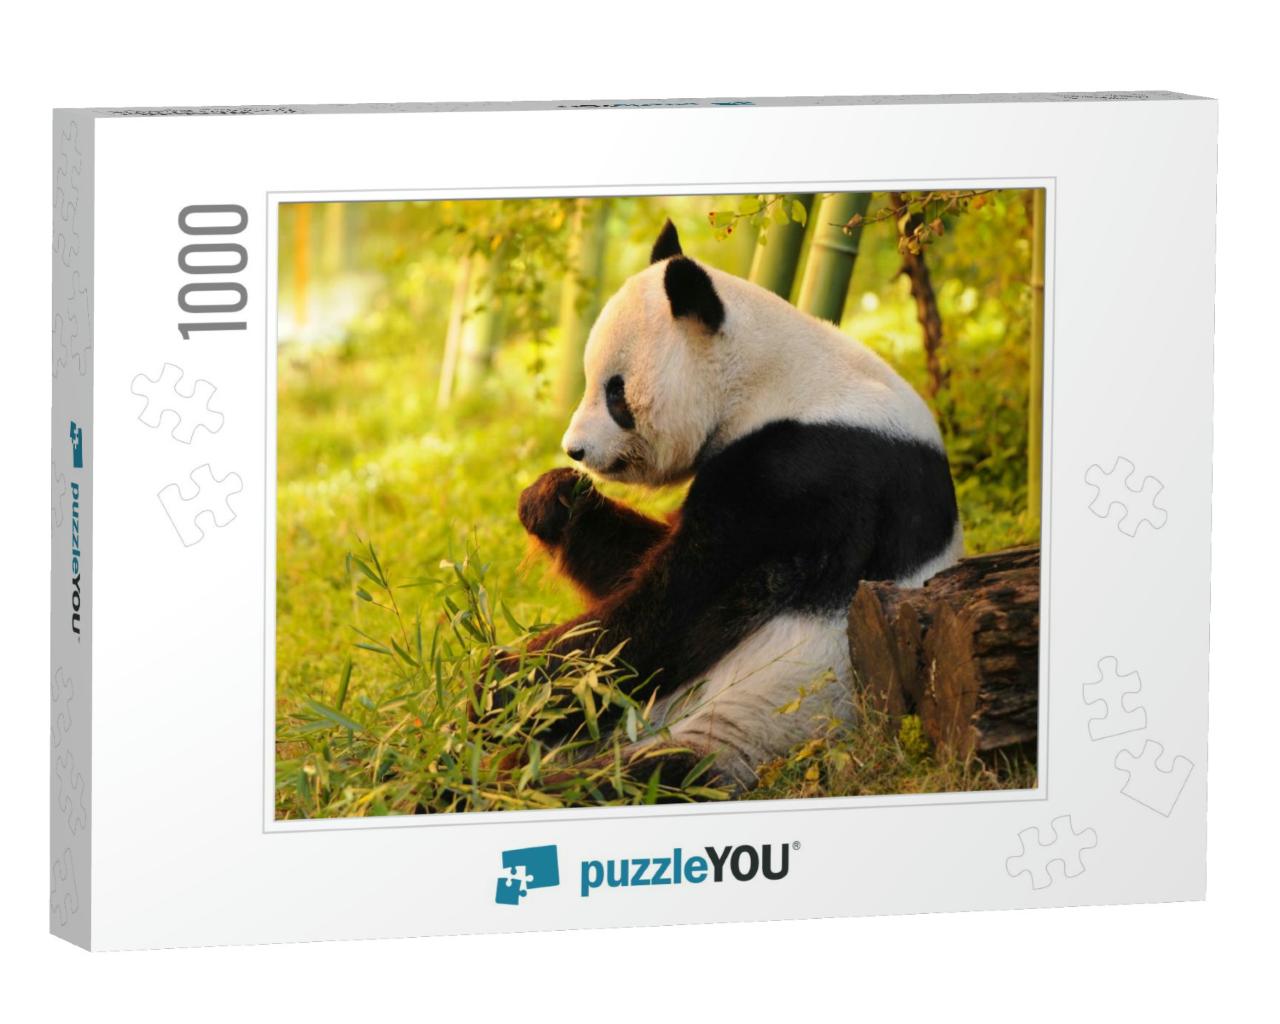 Big Panda Sitting on the Forest Floor Eating Bamboo... Jigsaw Puzzle with 1000 pieces